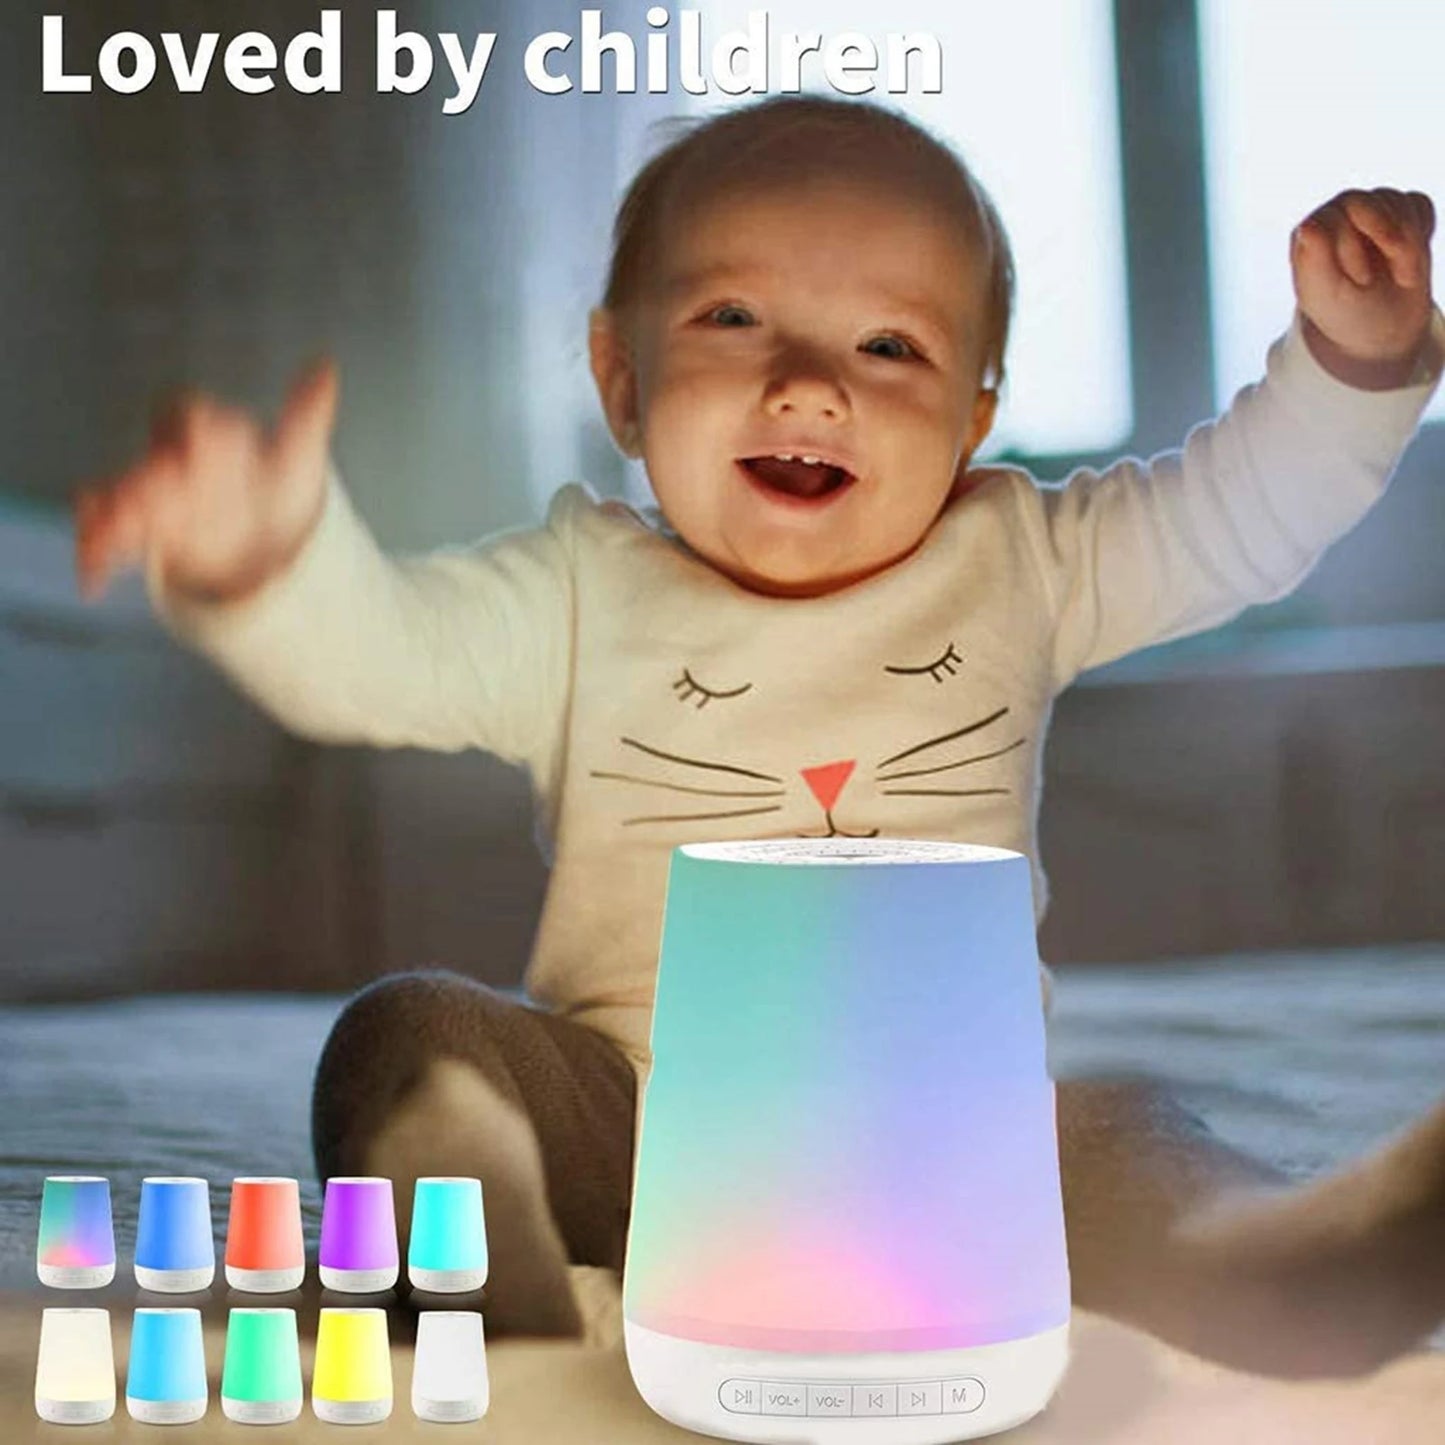 Ultimate Sleep Enhancer: Smart Sound Machine with 34 Soothing Sounds, Night Light, App Control & Custom Timer